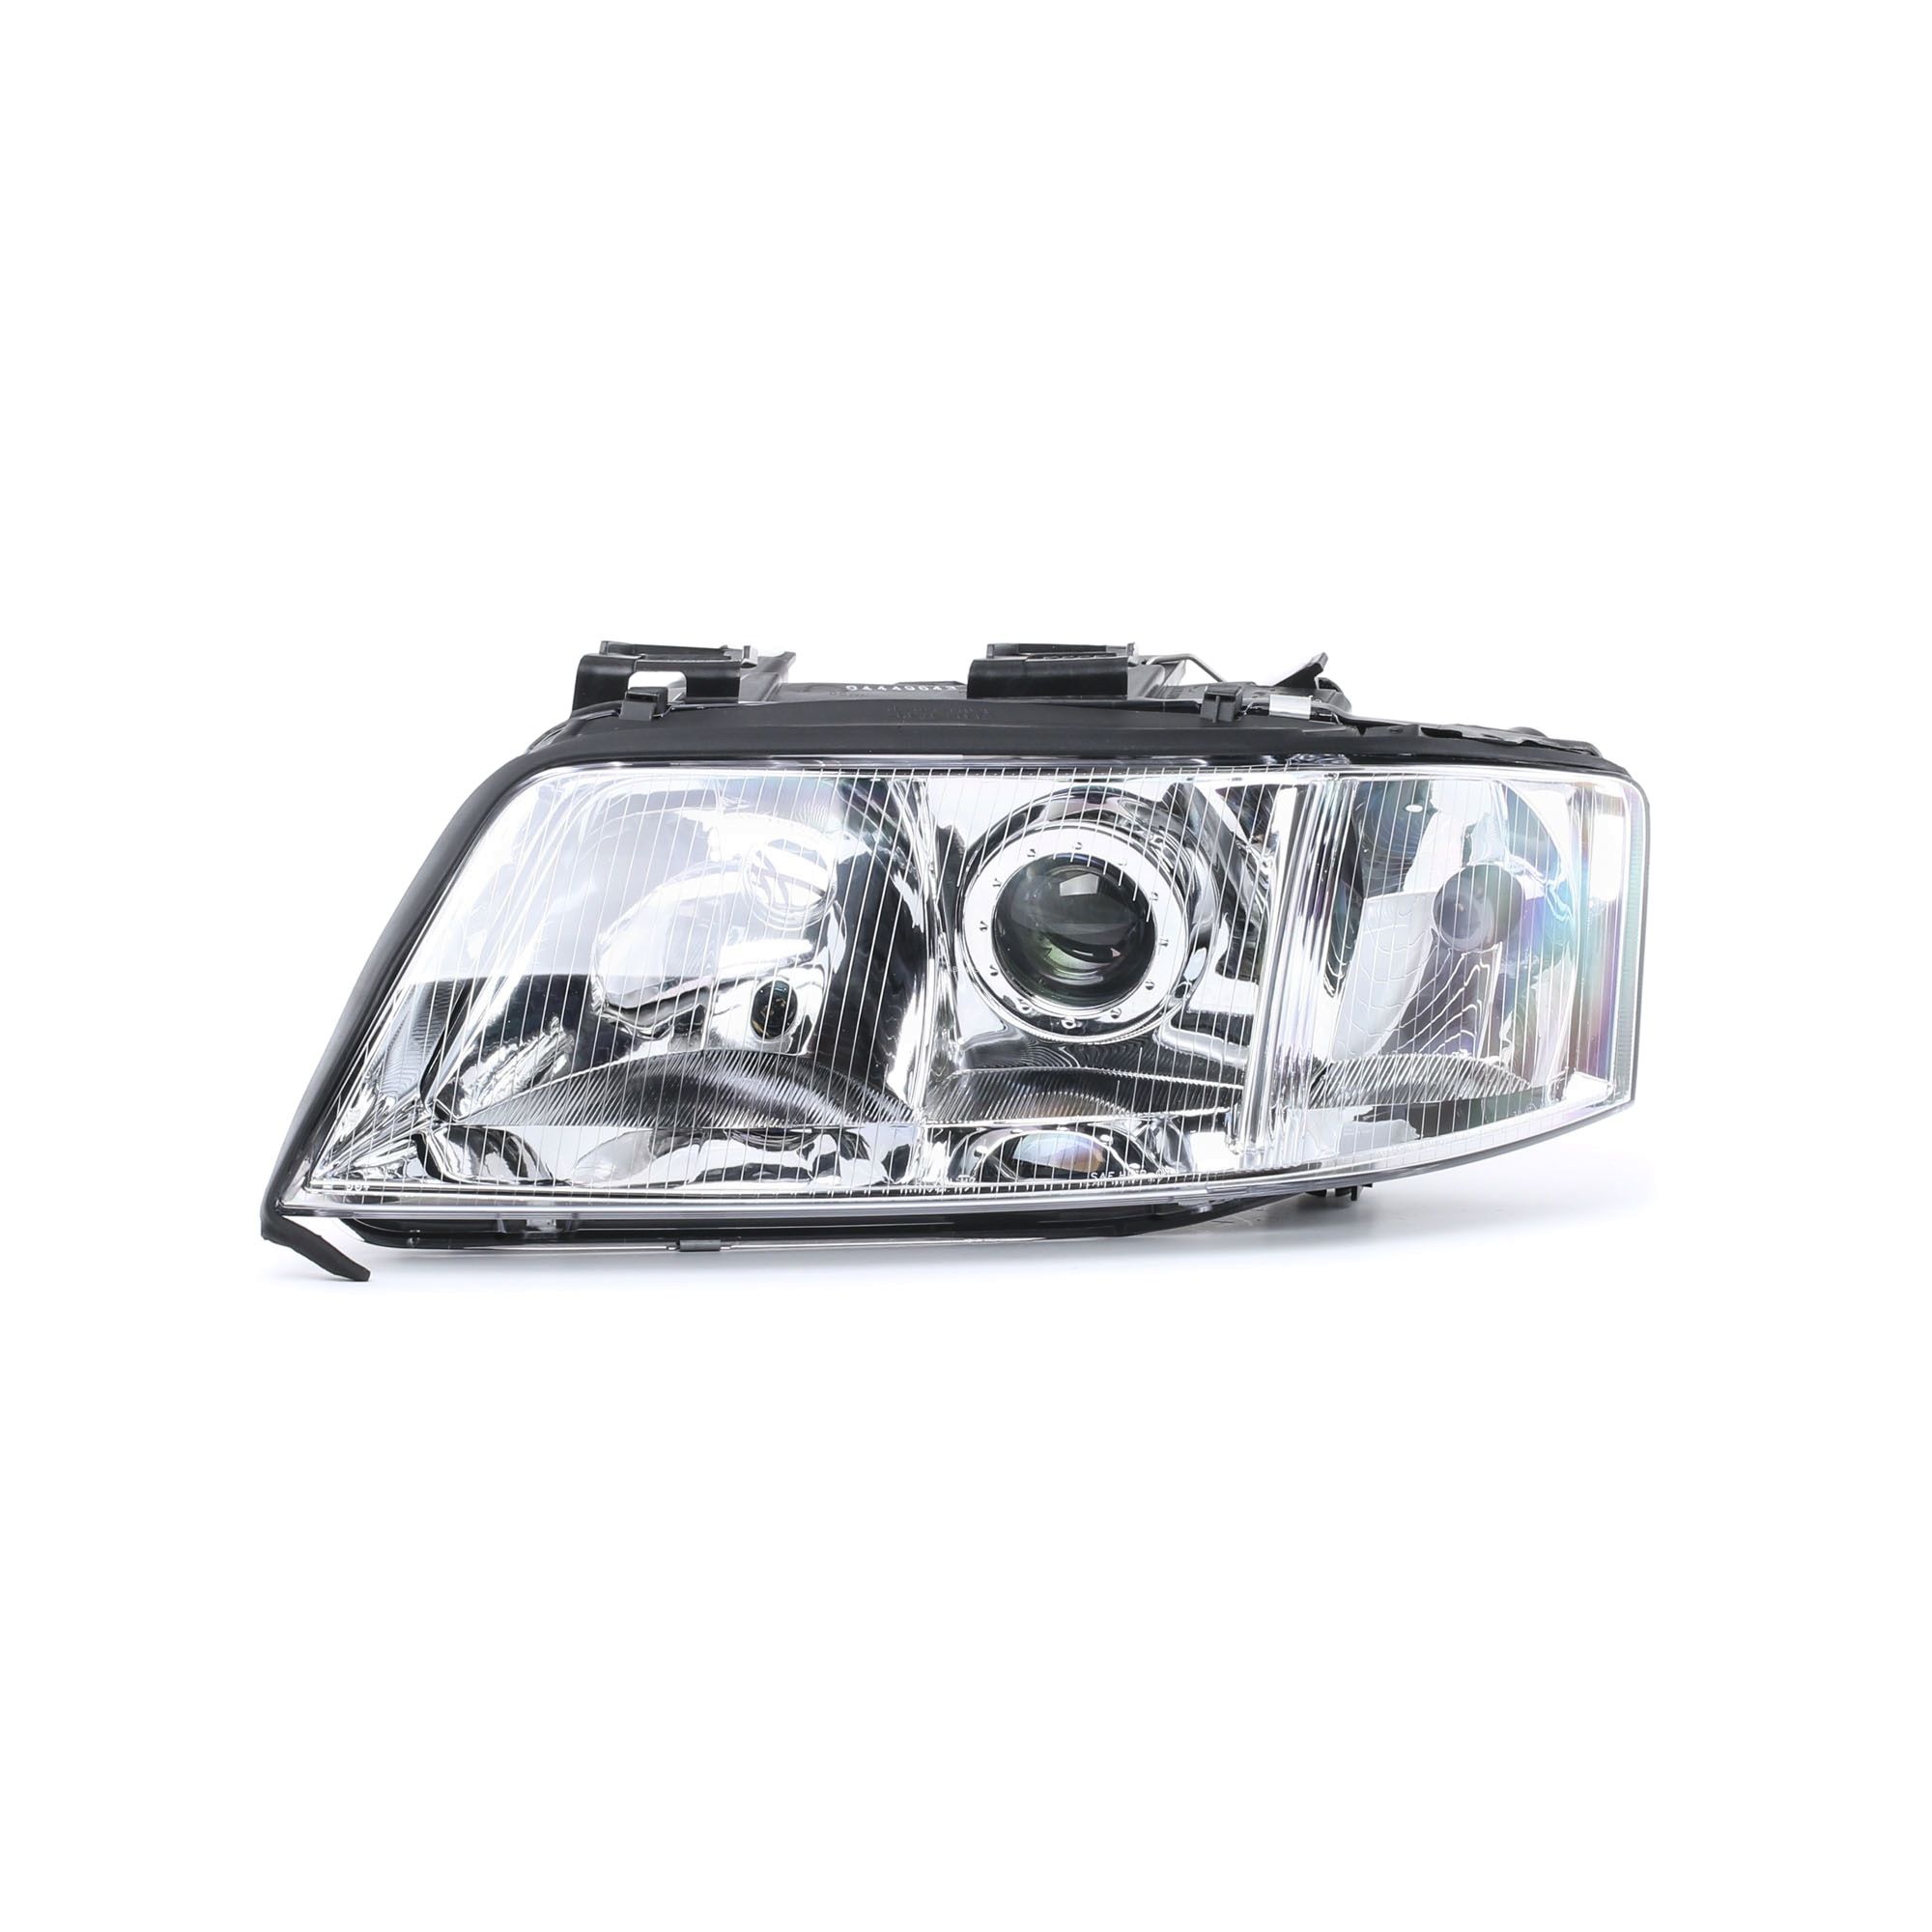 ABAKUS 441-1134L-LD-EM Headlight Left, H1, H7, Crystal clear, with indicator, for right-hand traffic, without motor for headlamp levelling, P14.5s, PX26d